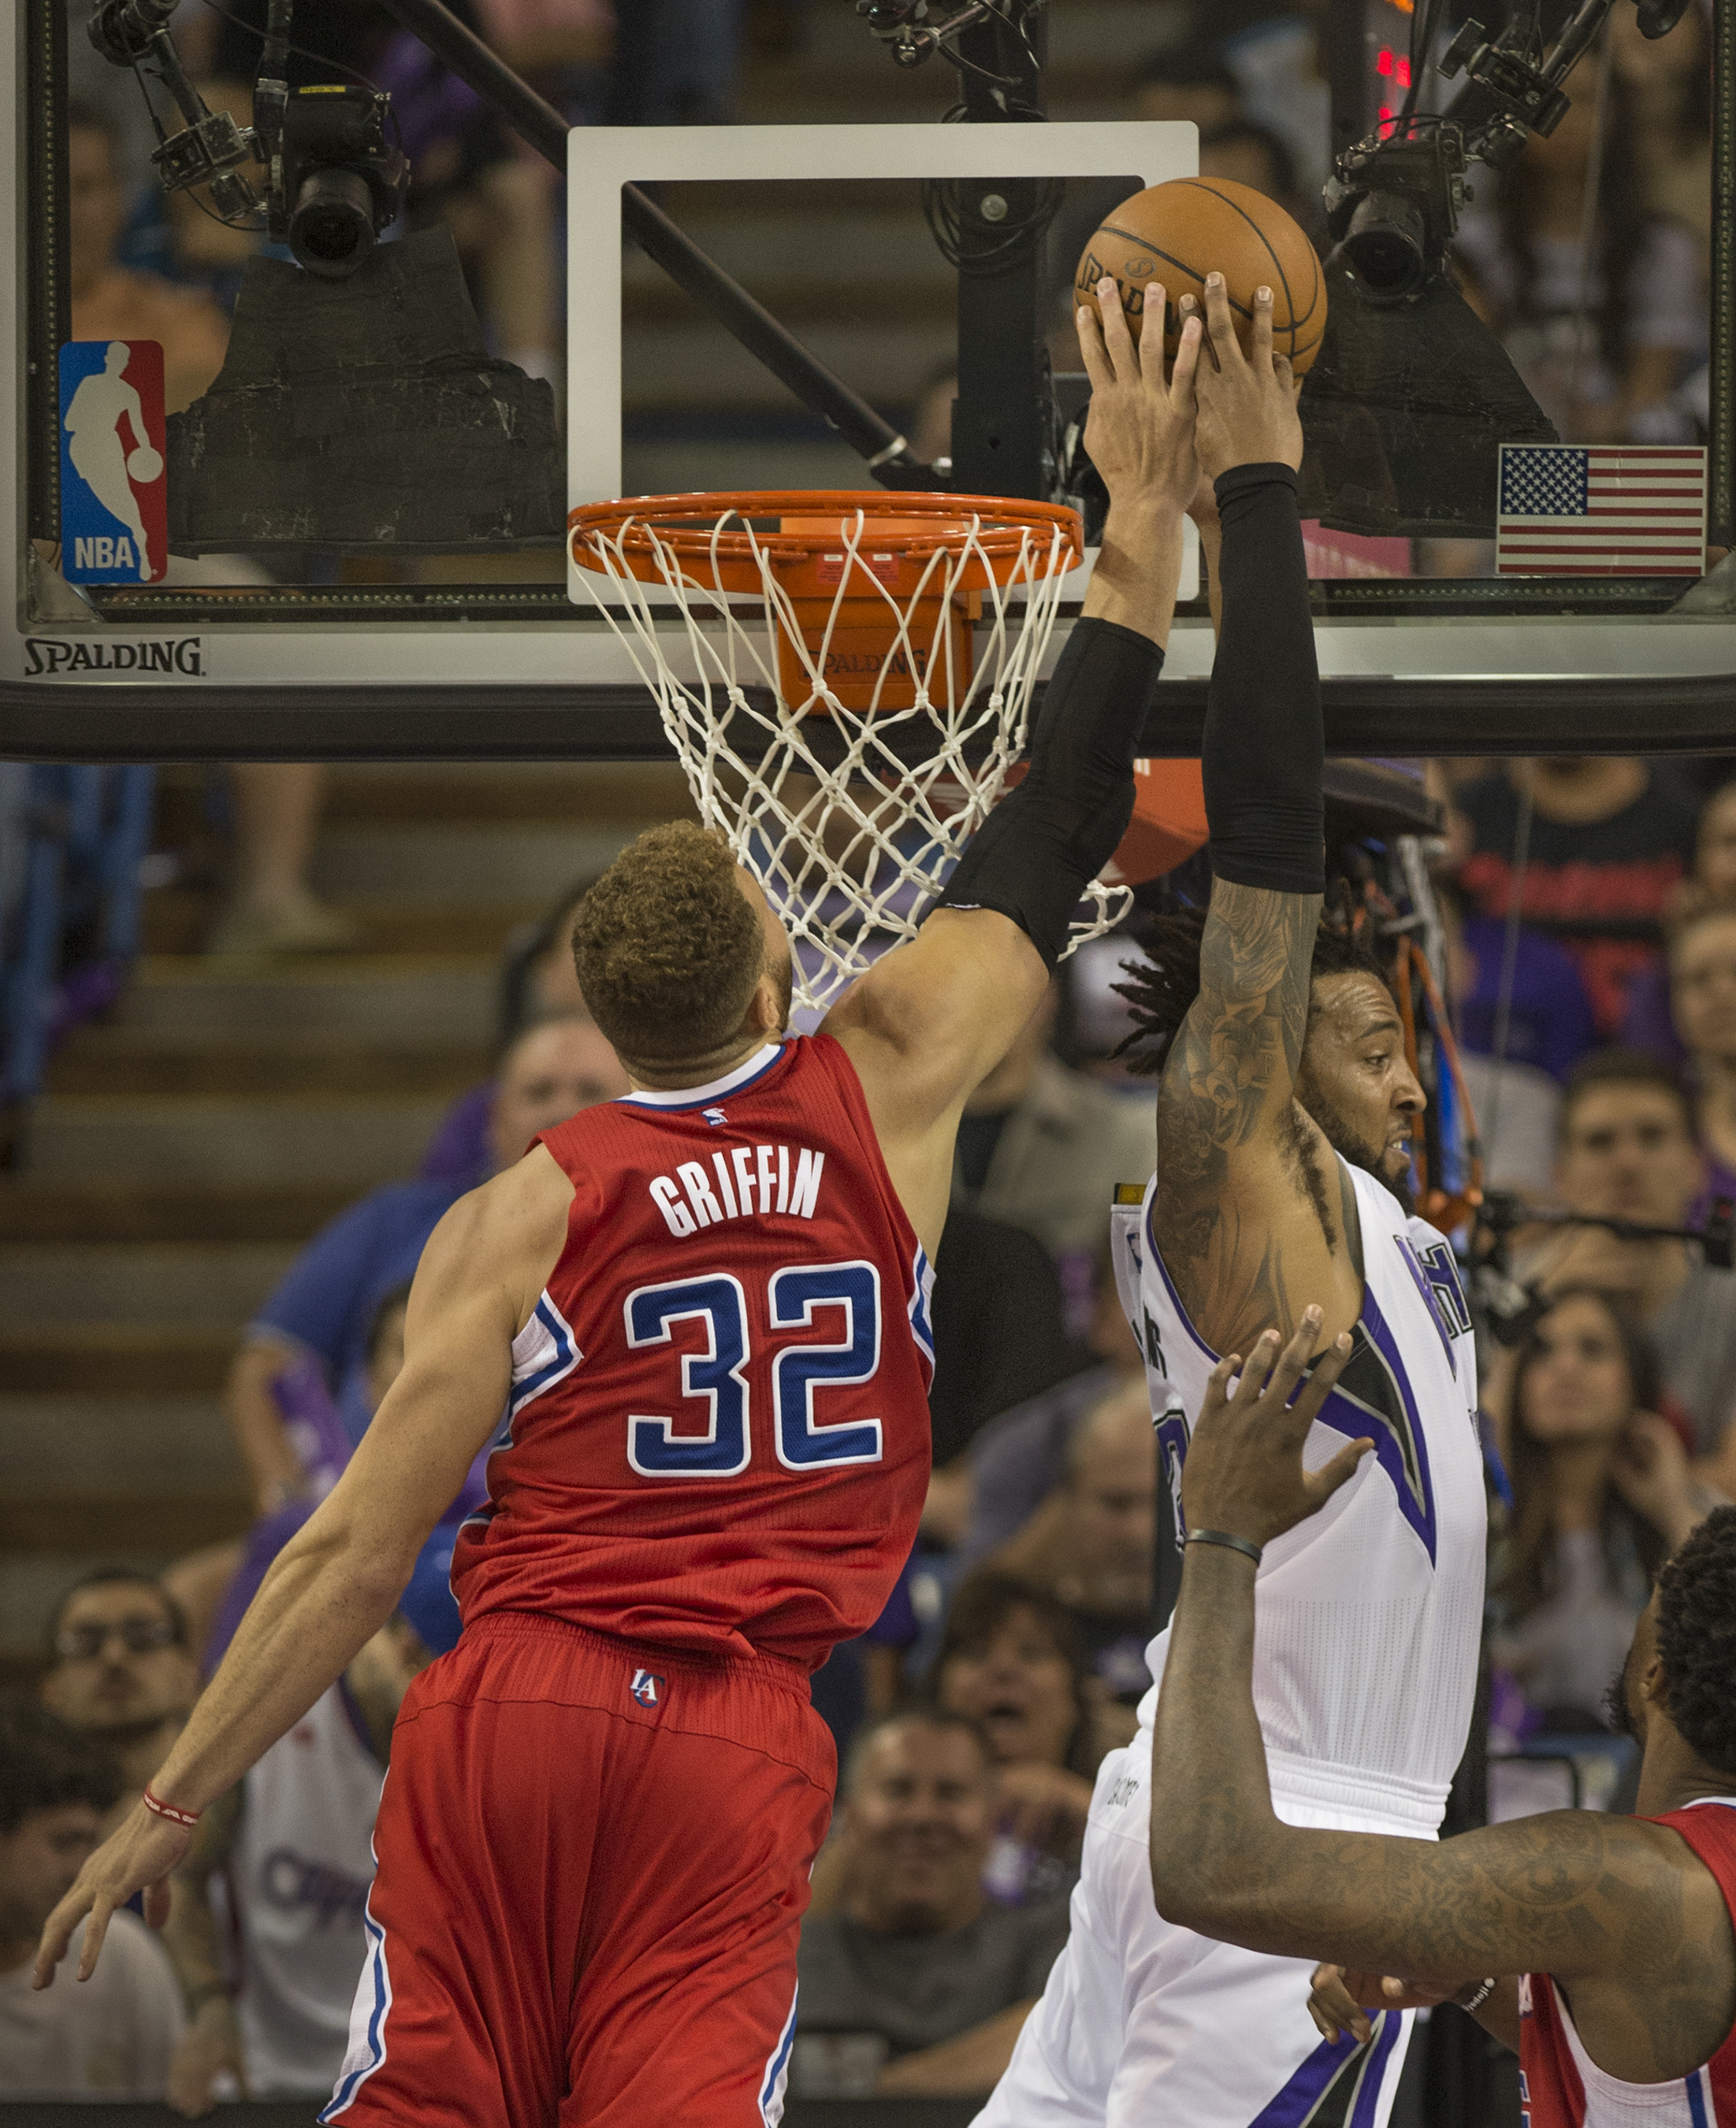  Sacramento Kings forward Derrick Williams (13) has his reverse dunk attempt blocked by Los Angeles Clippers forward Blake Griffin (32) in the fourth quarter on Wednesday night, March 18, 2015 in the NBA game between the Sacramento Kings and Los Ange